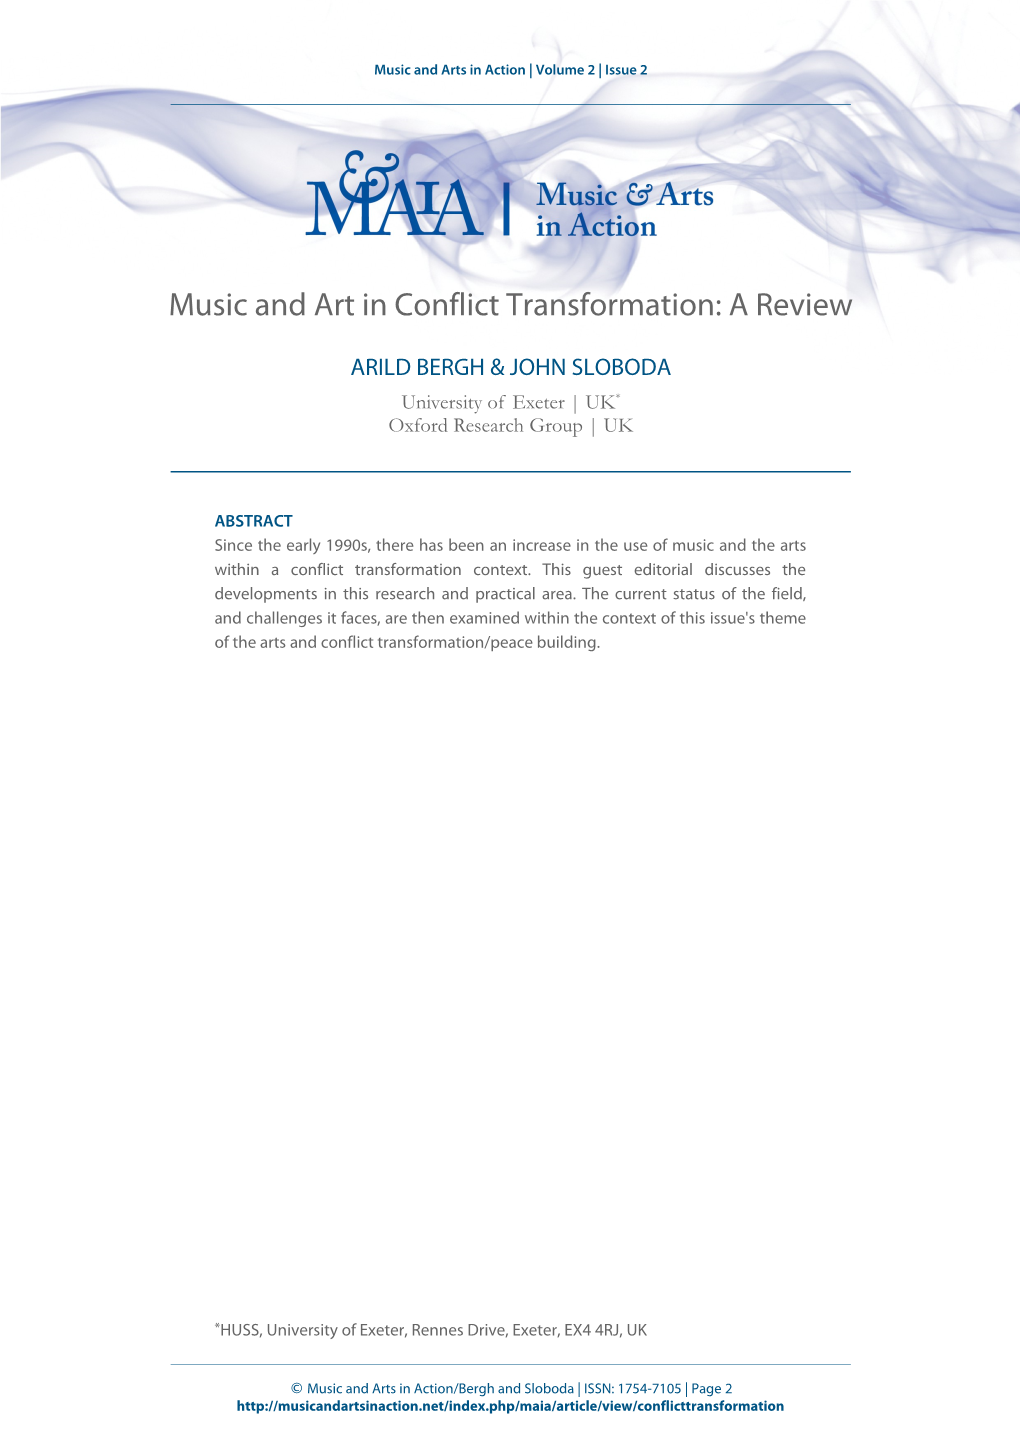 Music and Art in Conflict Transformation: a Review